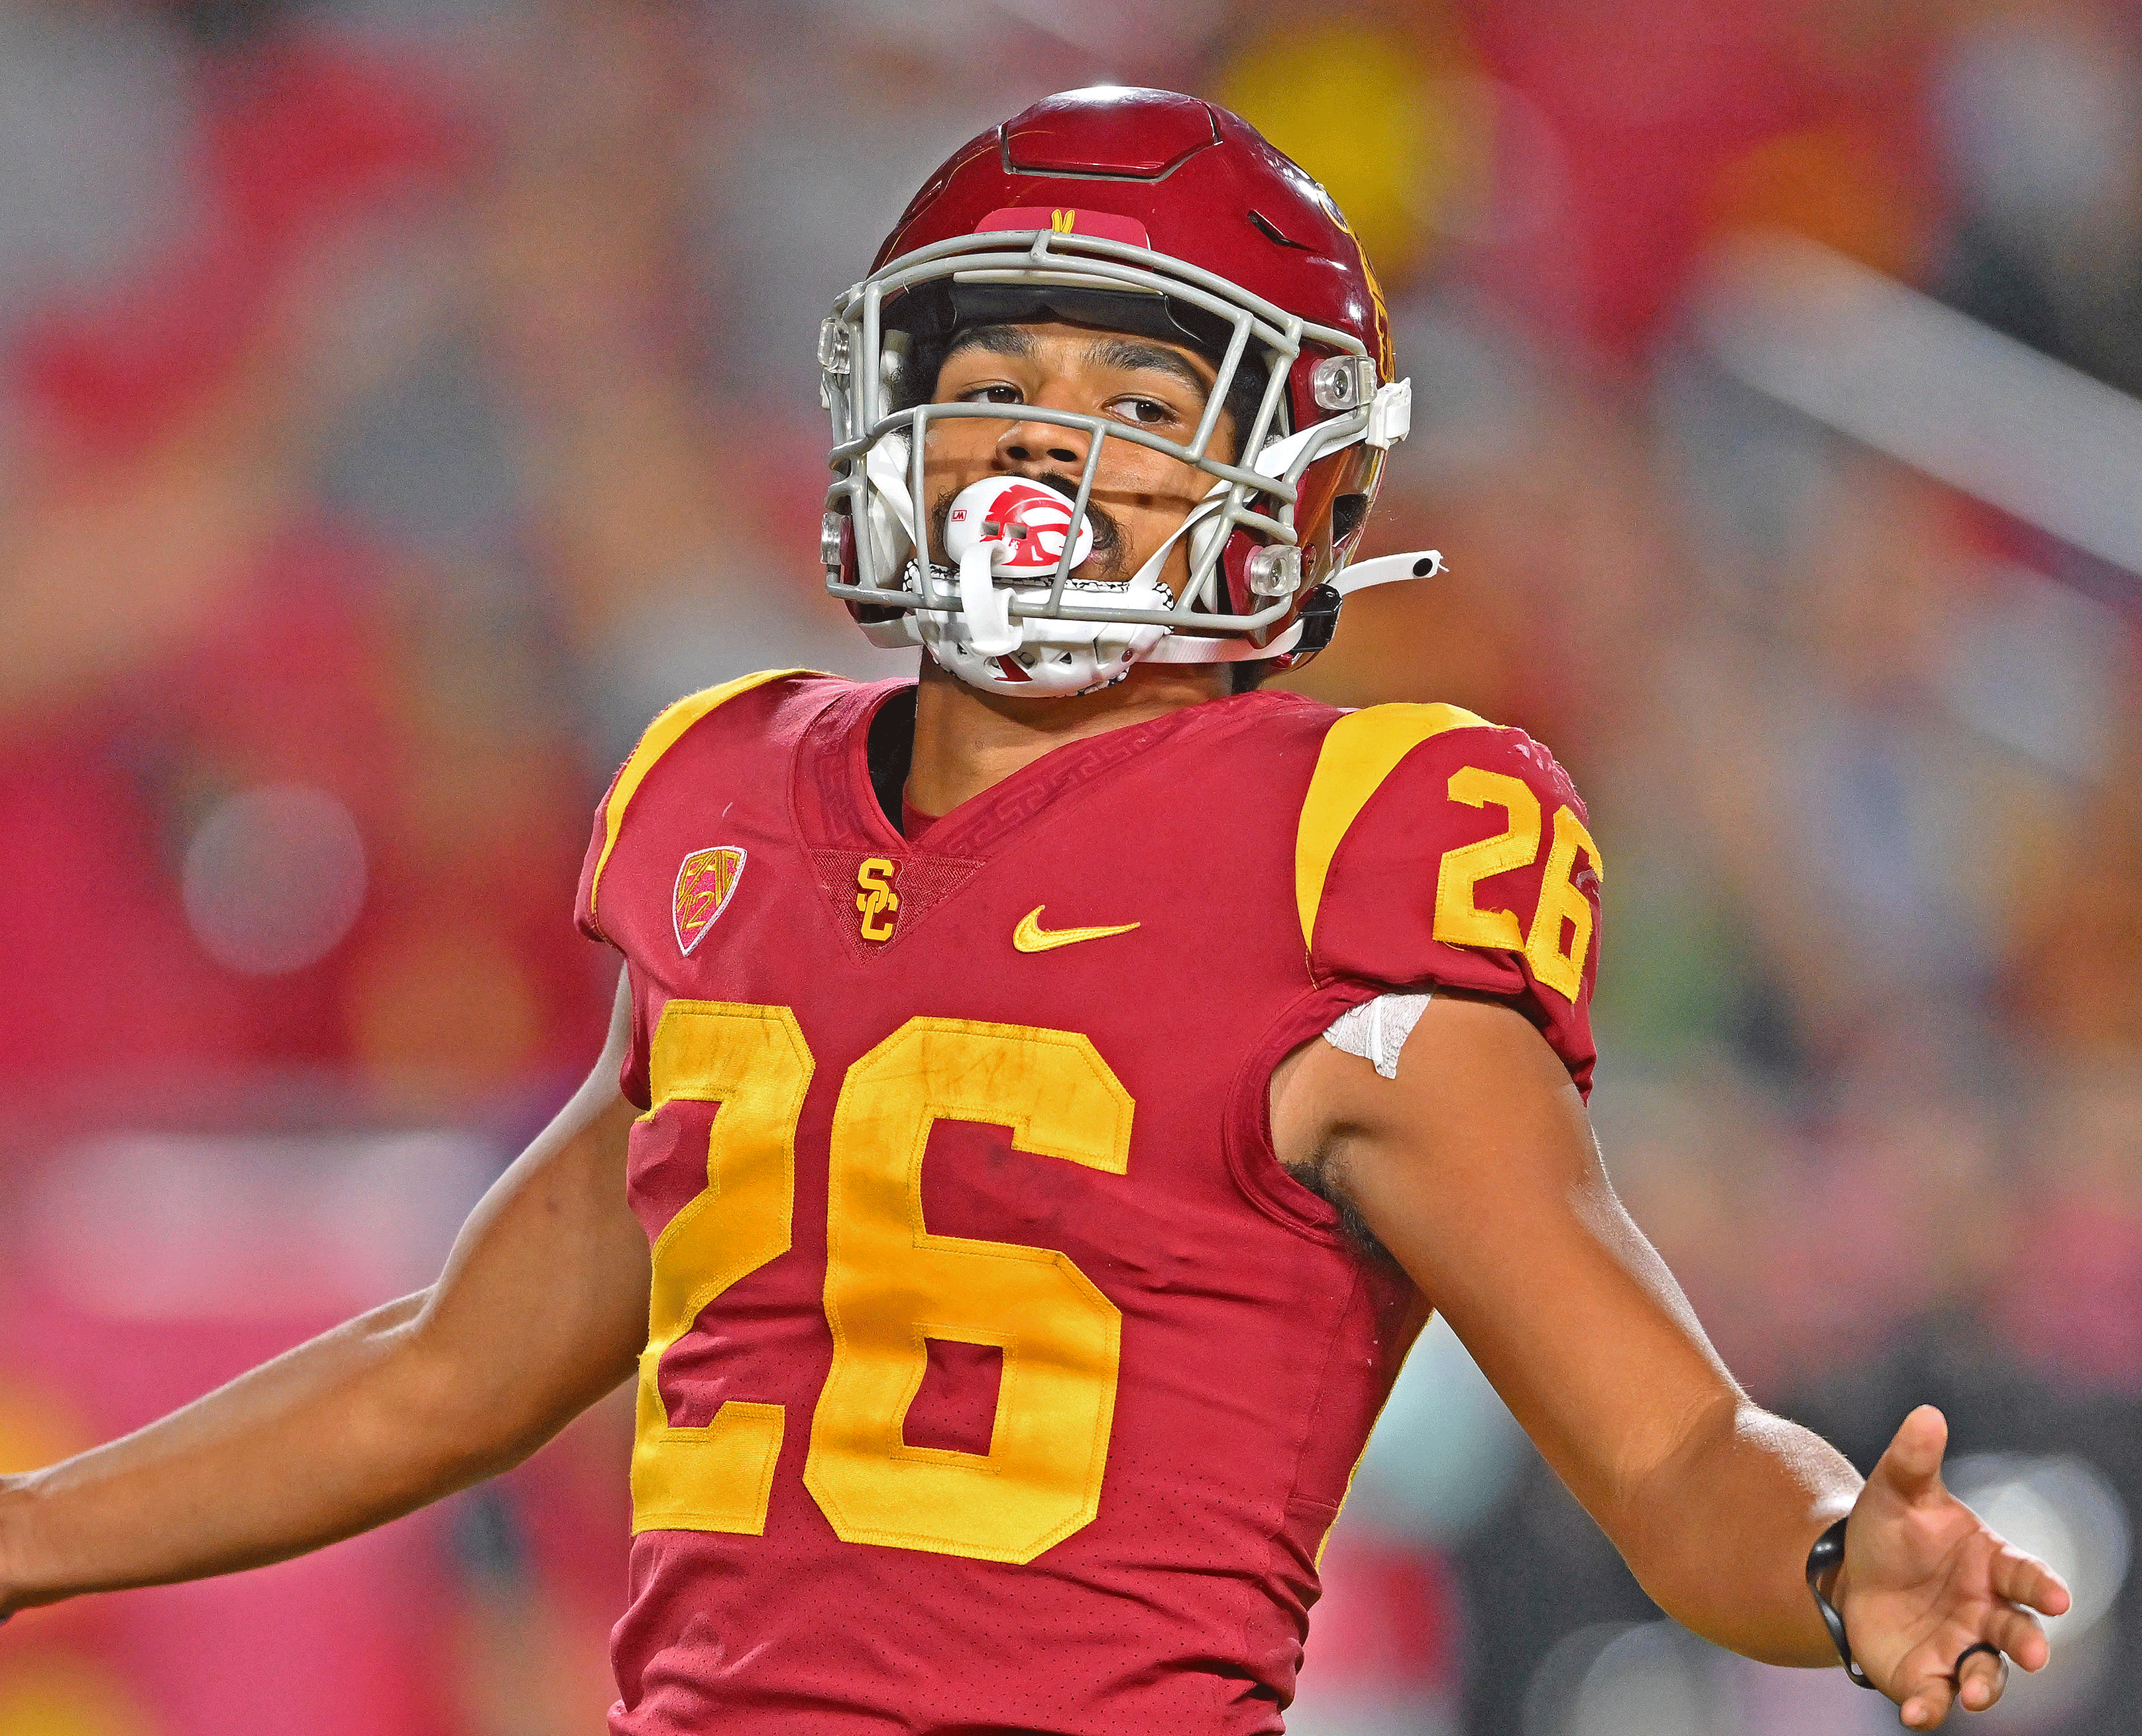 Week 6 College Football Parlay Picks: USC and UCLA Keep Making Noise